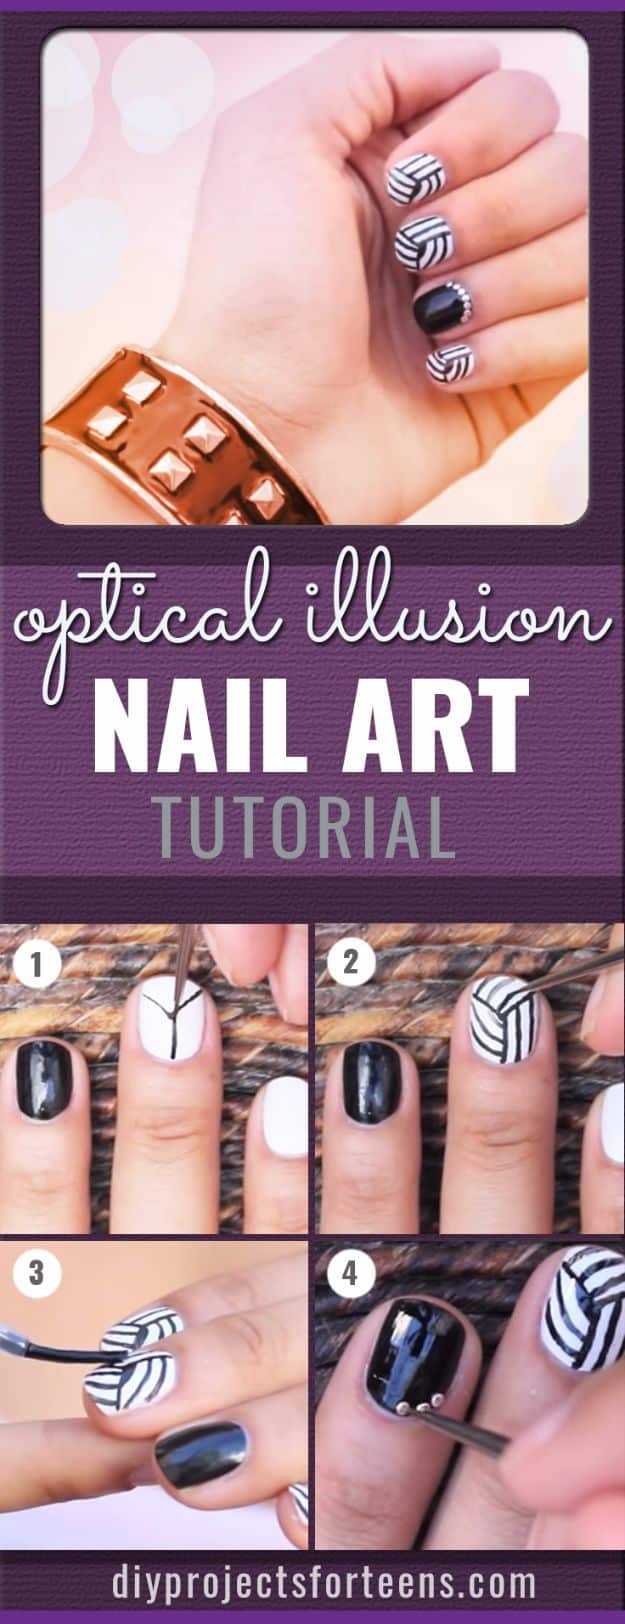 Easy Ways to Paint Nails - Easy Optical Illusion Nail Art - Quick Tips and Tricks for Manicures at Home - Nail Designs and Art Ideas for Simple DIY Pedicures and Manicure at Home - Hacks and Tutorials with Cool Step by Step Instructions and Tutorials - DIY Projects and Crafts by DIY JOY 